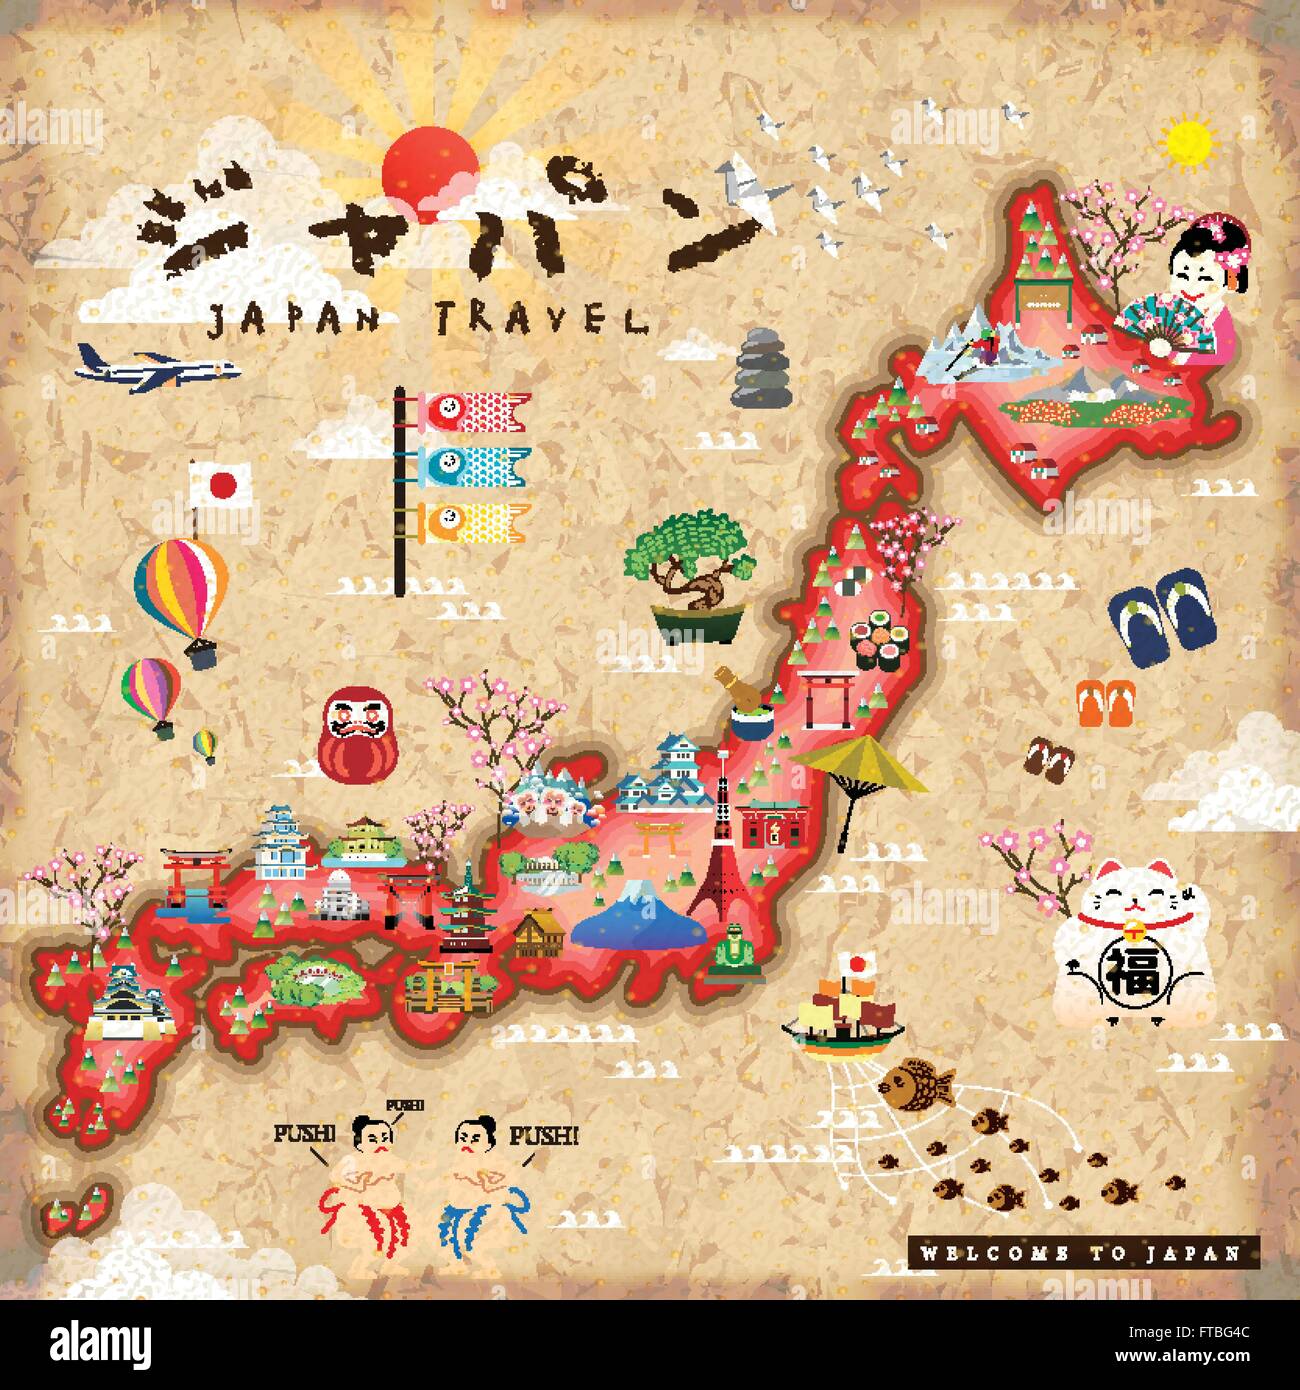 Japan travel map with famous attractions - Japan in Japanese Stock Vector